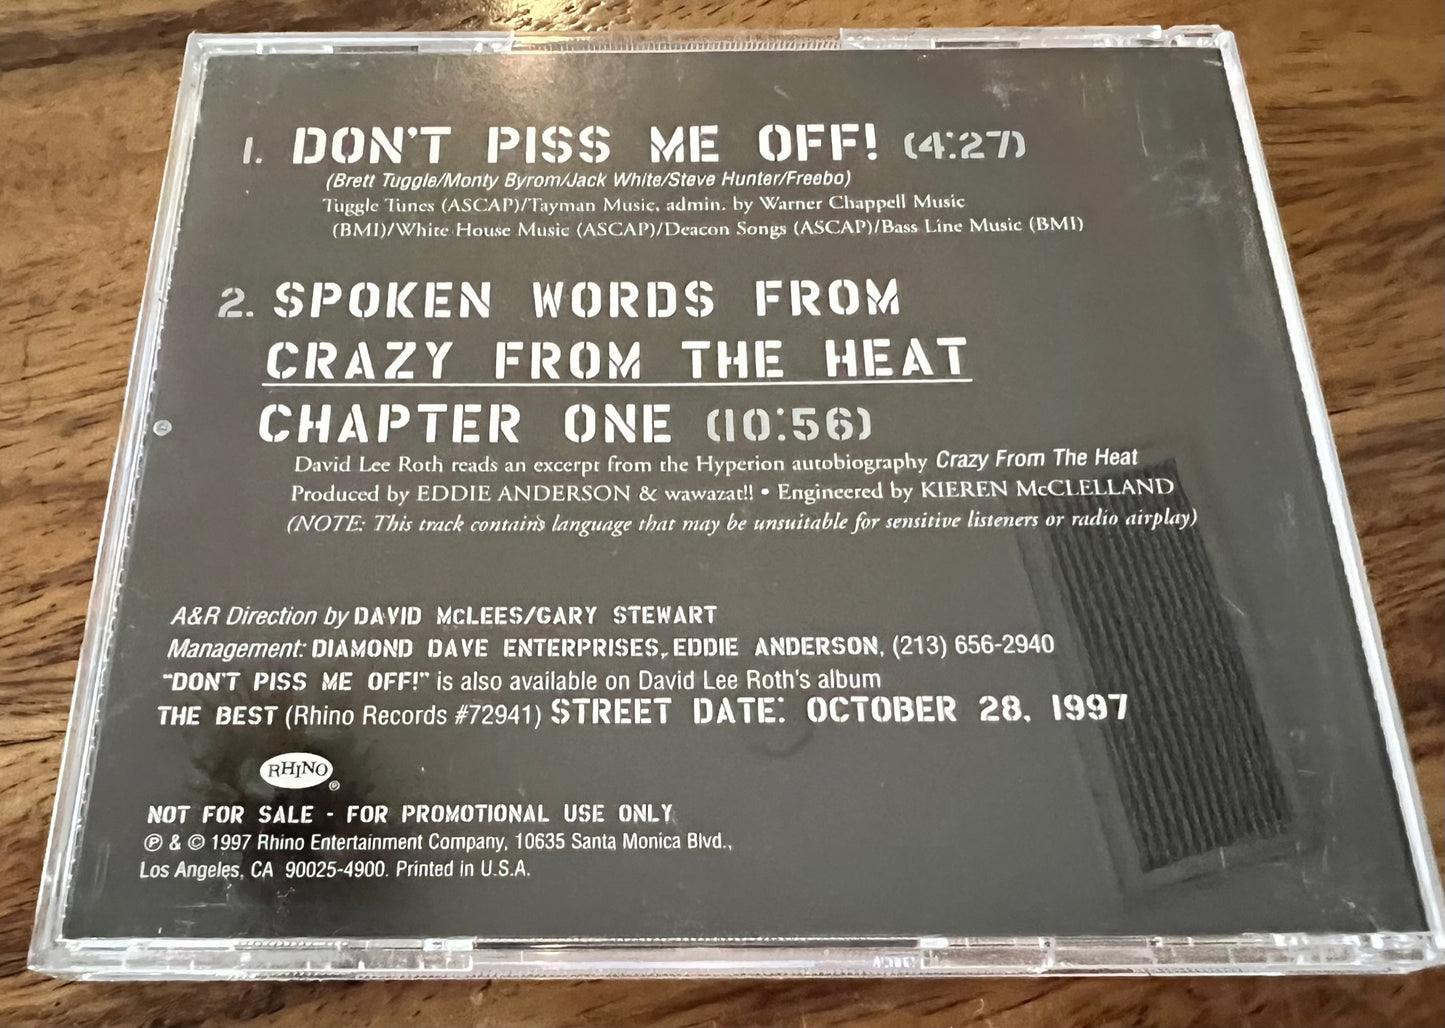 SOLD! David Lee Roth Hand Written Lyrics "Don't Piss Me Off" Rare One of Kind 1997 w/ CD